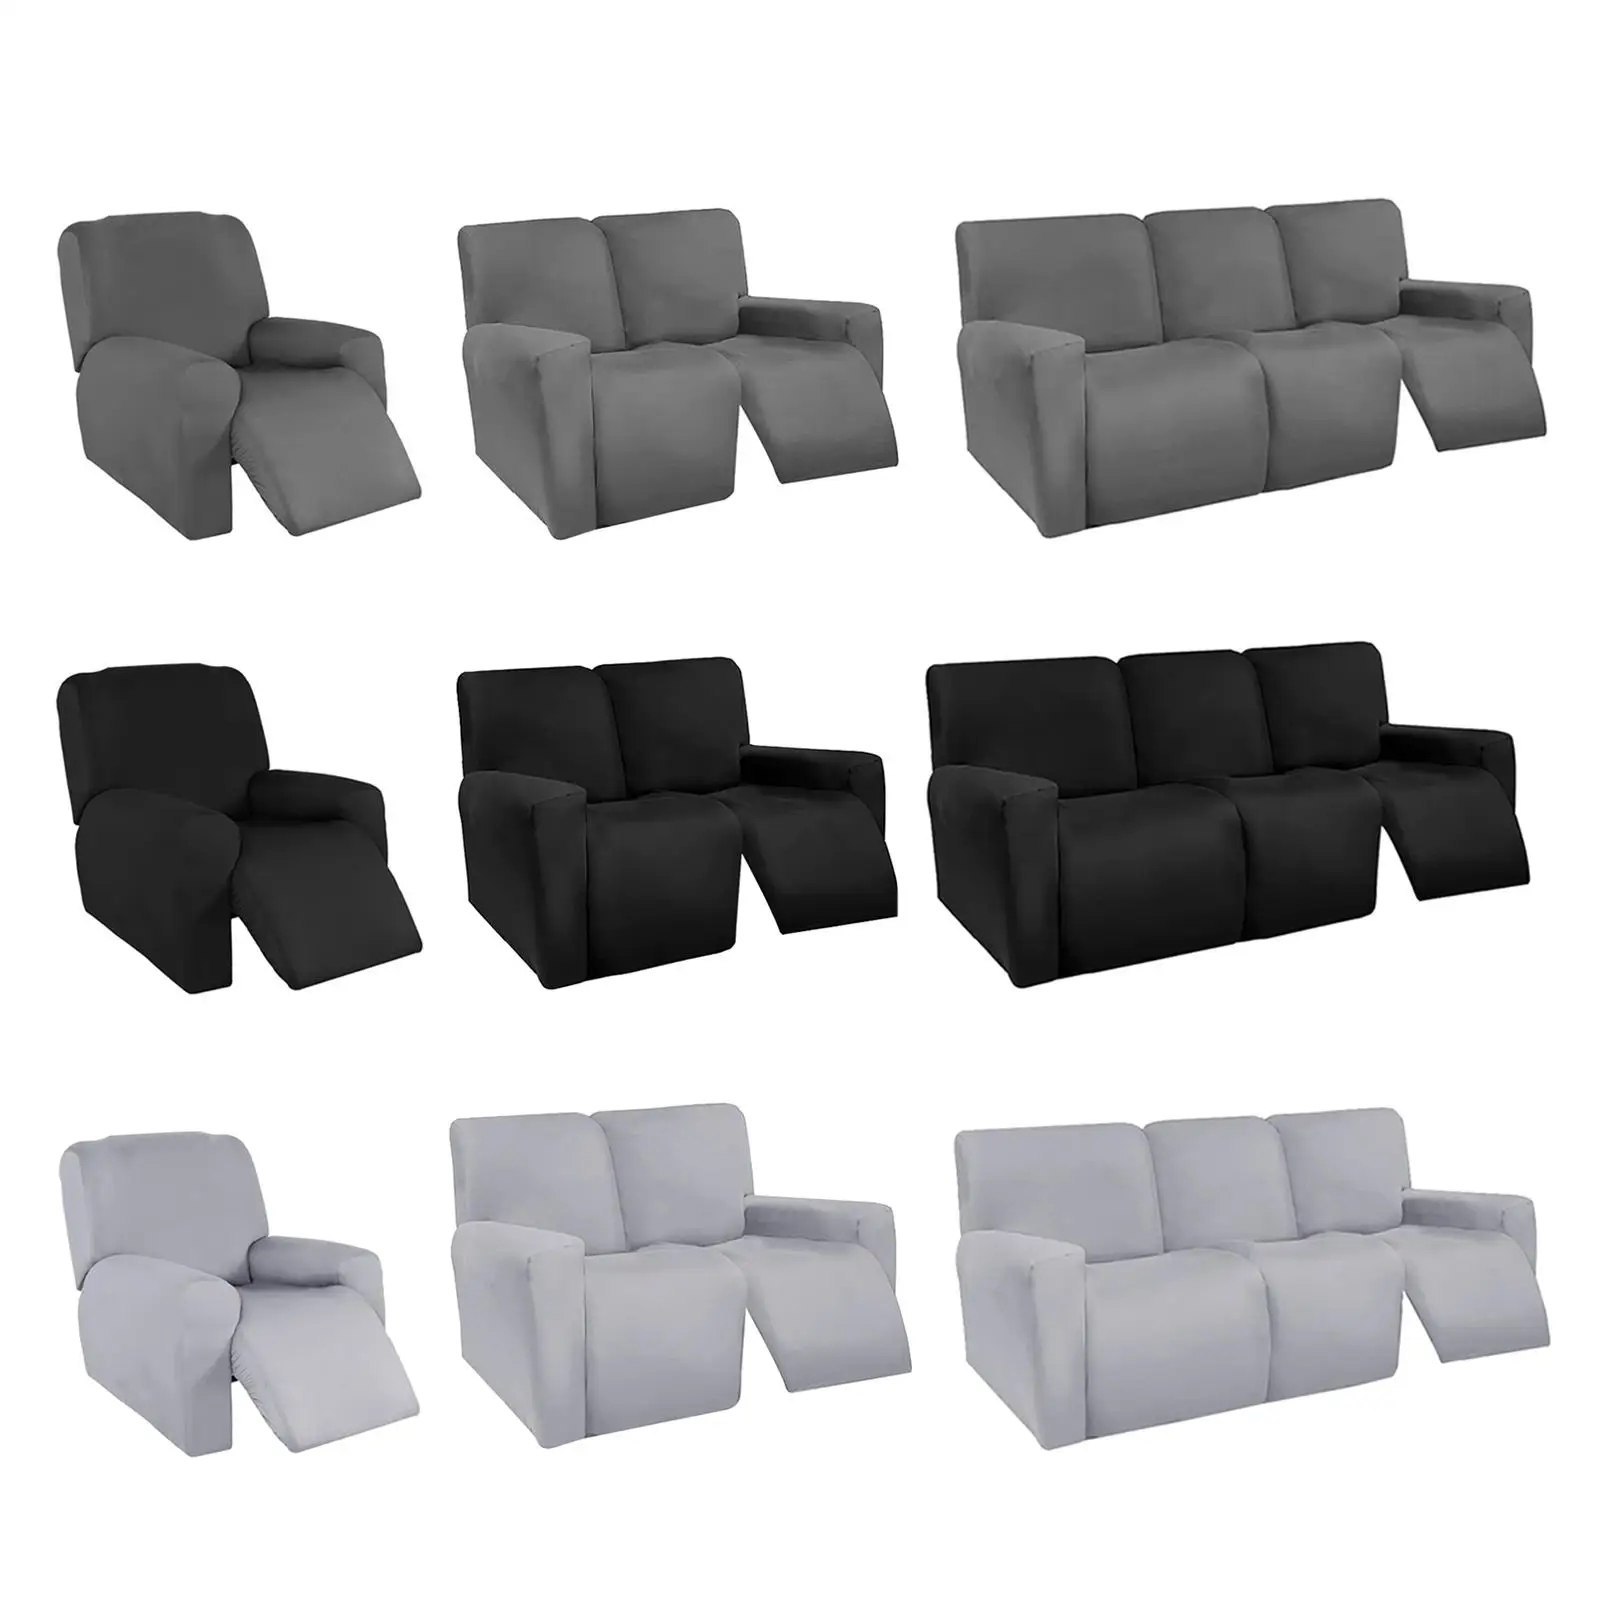 Stretch recliner Sofa Covers with Elastic Sofa Slipcover for Pets Cushion Couch Kids